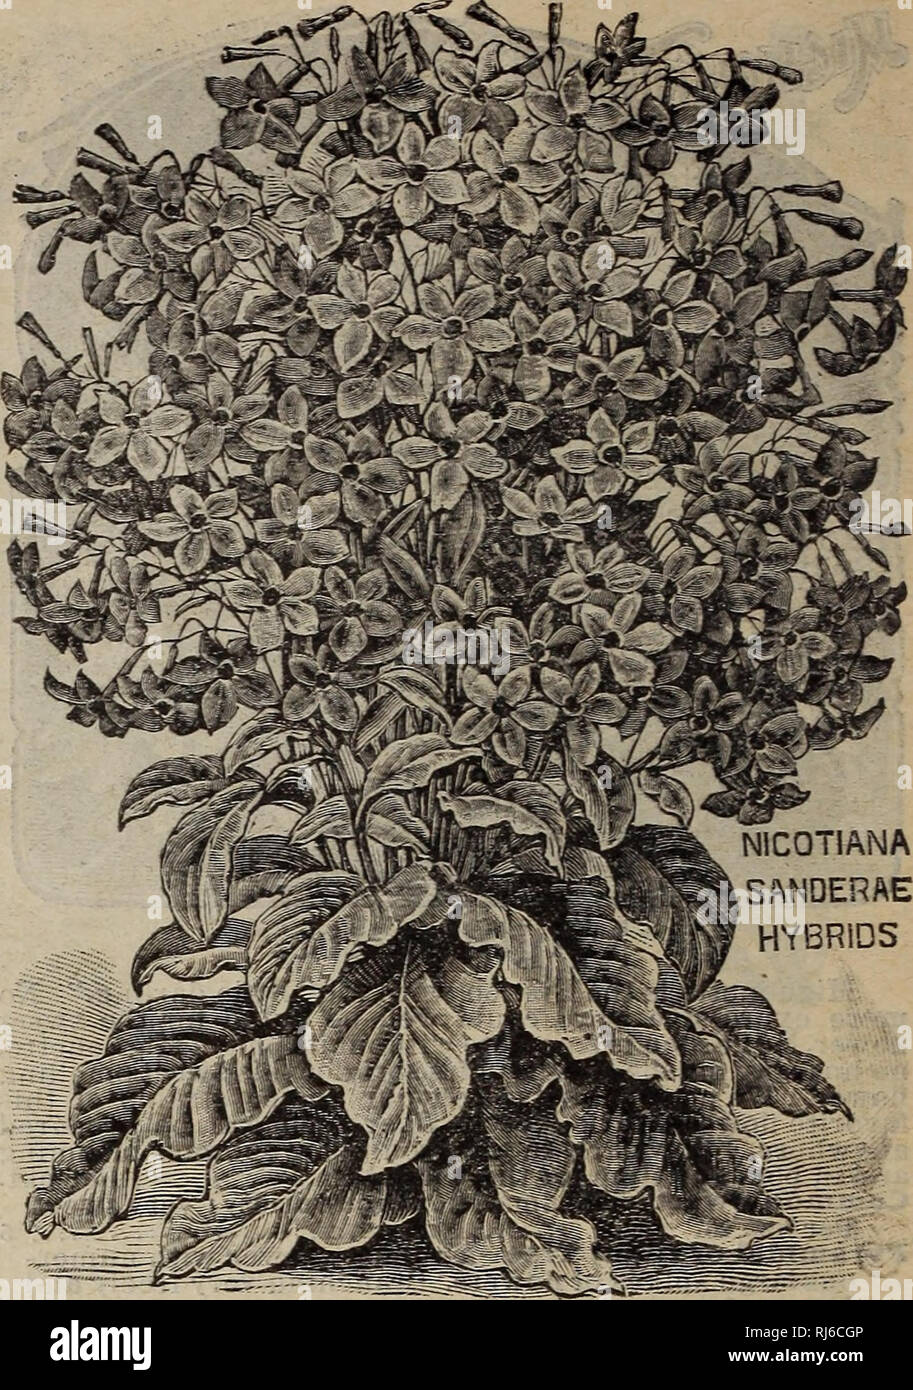 . Childs' rare flowers, vegetables &amp; fruits. Commercial catalogs Seeds; Nurseries (Horticulture) Catalogs; Seeds Catalogs; Flowers Catalogs; Vegetables Catalogs; Fruit trees Catalogs; John Lewis Childs (Firm); Commercial catalogs; Nurseries (Horticulture); Seeds; Flowers; Vegetables; Fruit trees. Miribilis—(Four O'clocks.) Plants are crowded for months with innumerable silk- like flowers of the most ravishing colors, and exhaling a de- licious perfume. Indeed, the celebrated &quot;Jockey Club&quot; perfume is made from Longiflora. Tom Thumb Yellow Leaved-Mixed colors. A new dwarf strain of Stock Photo